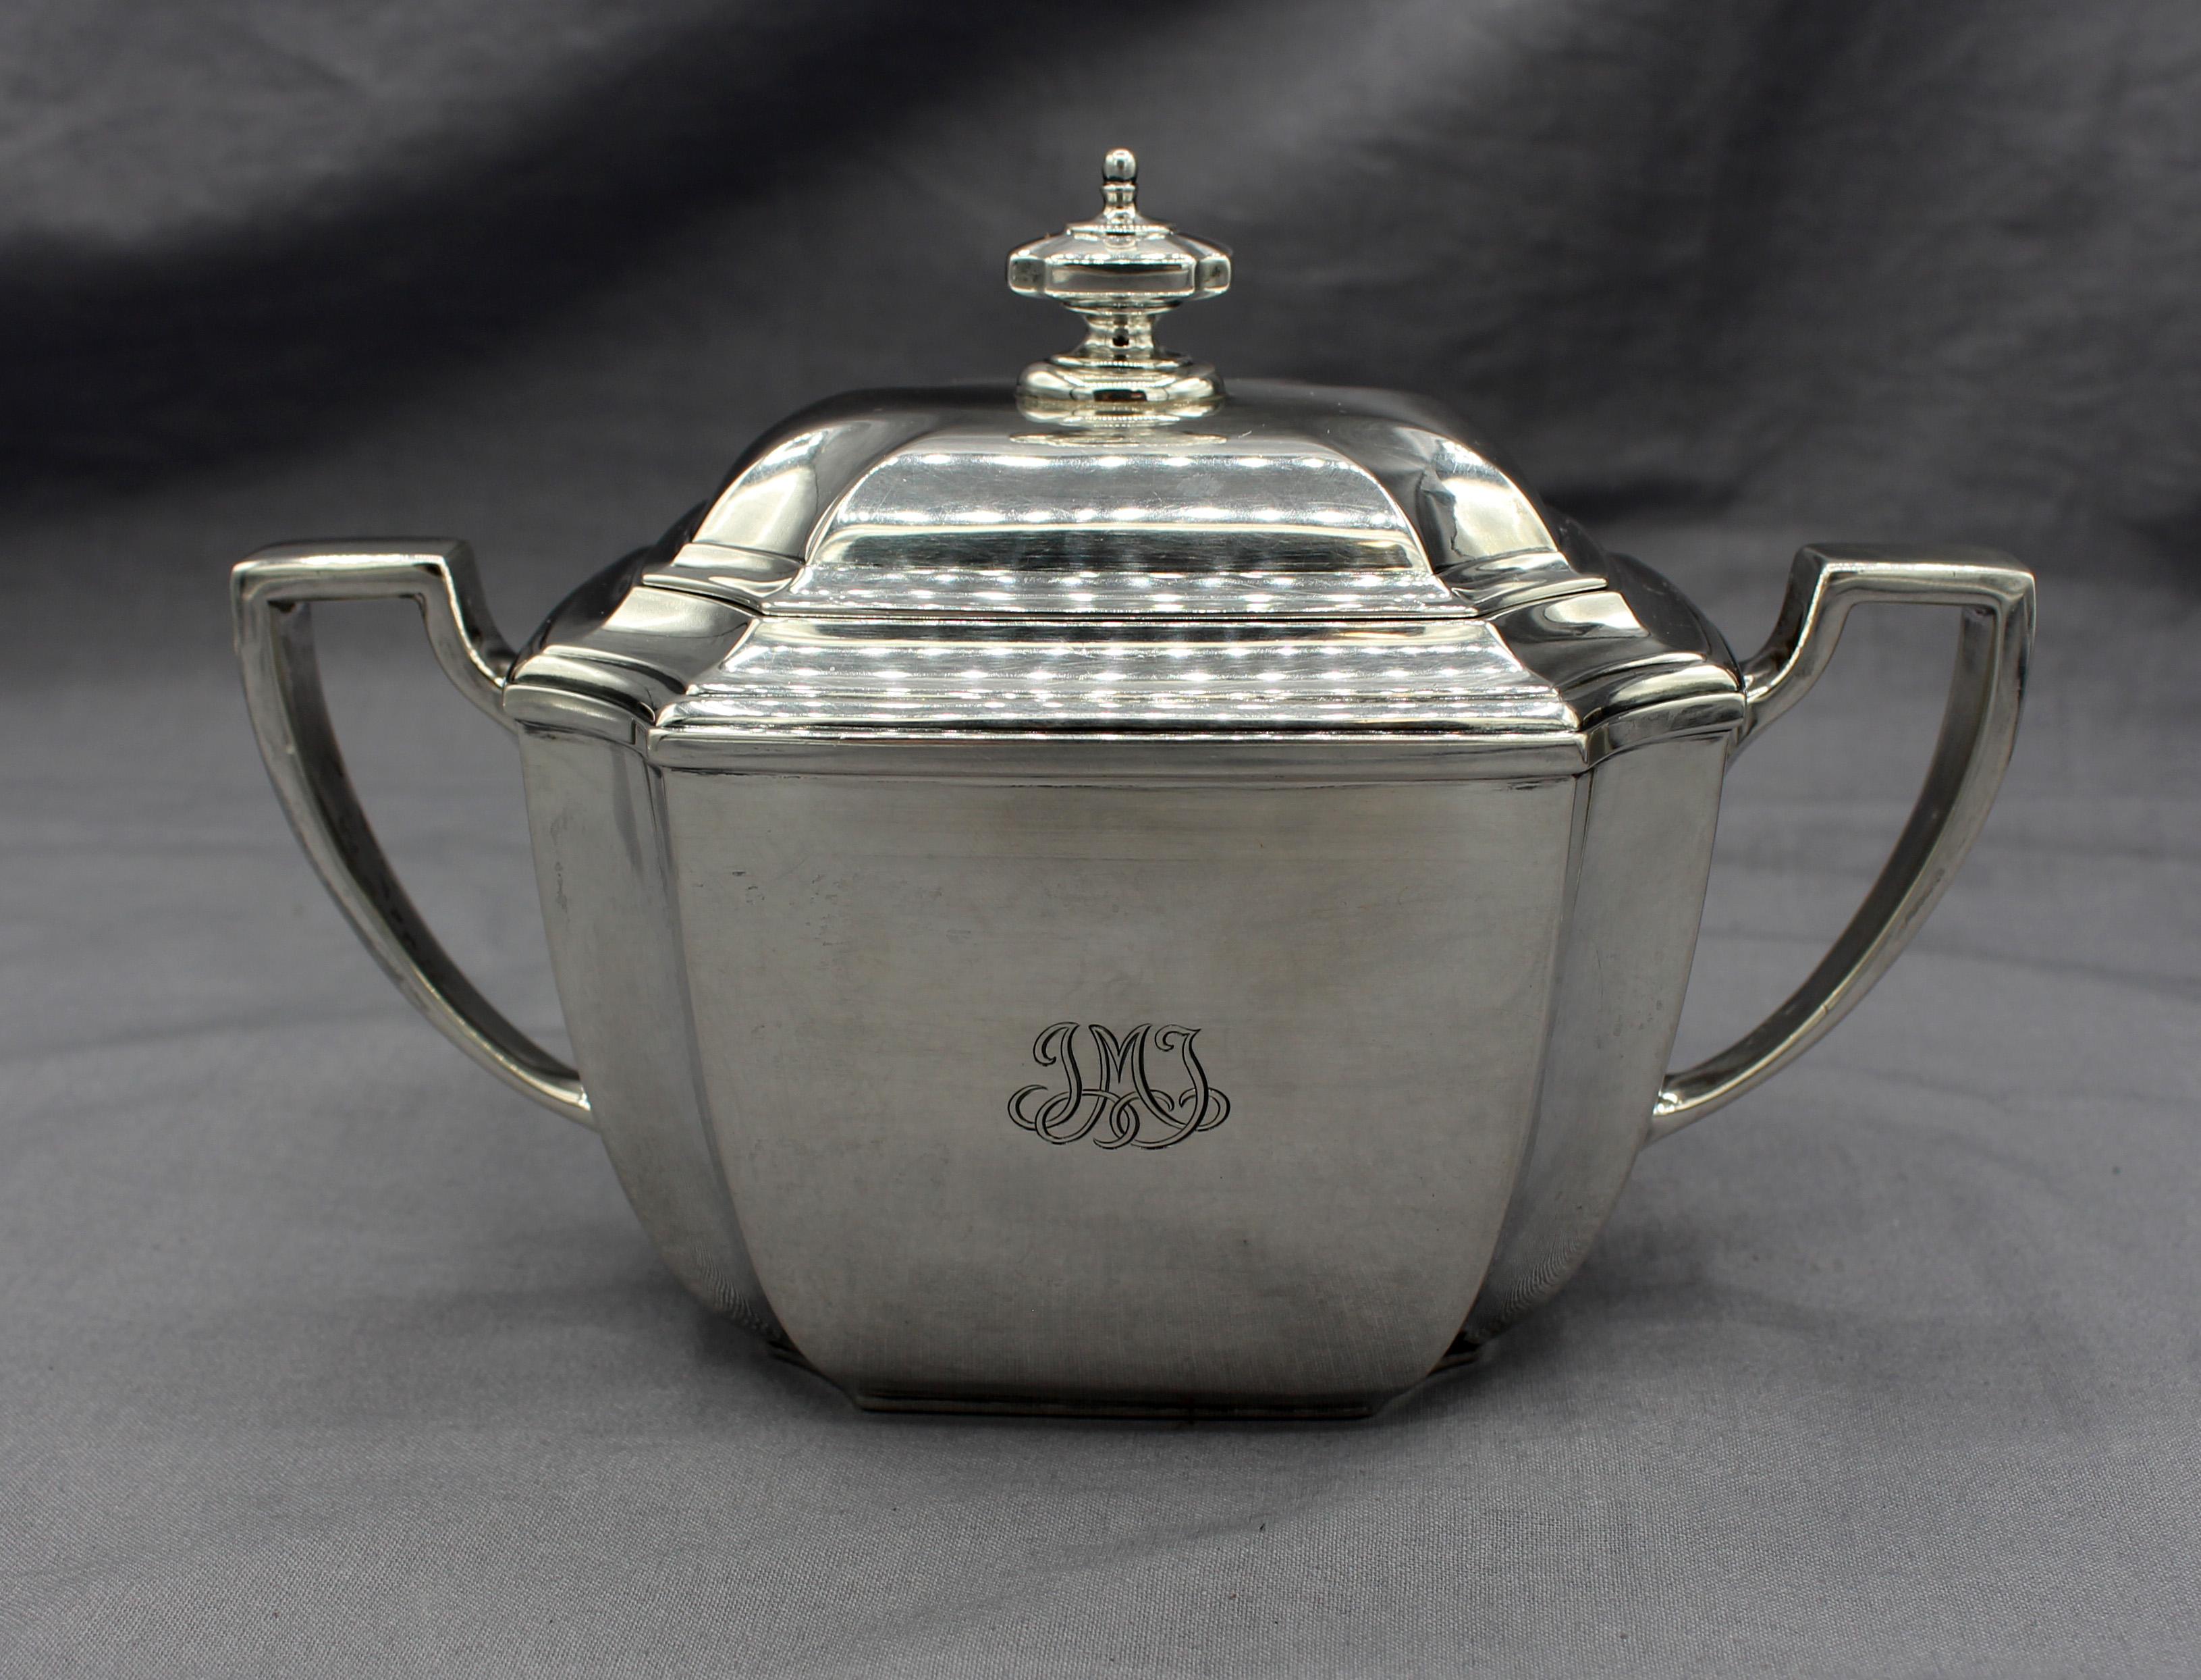 20th Century c. 1920s-30s 4-Piece Sterling Silver Tea Service by Tiffany For Sale